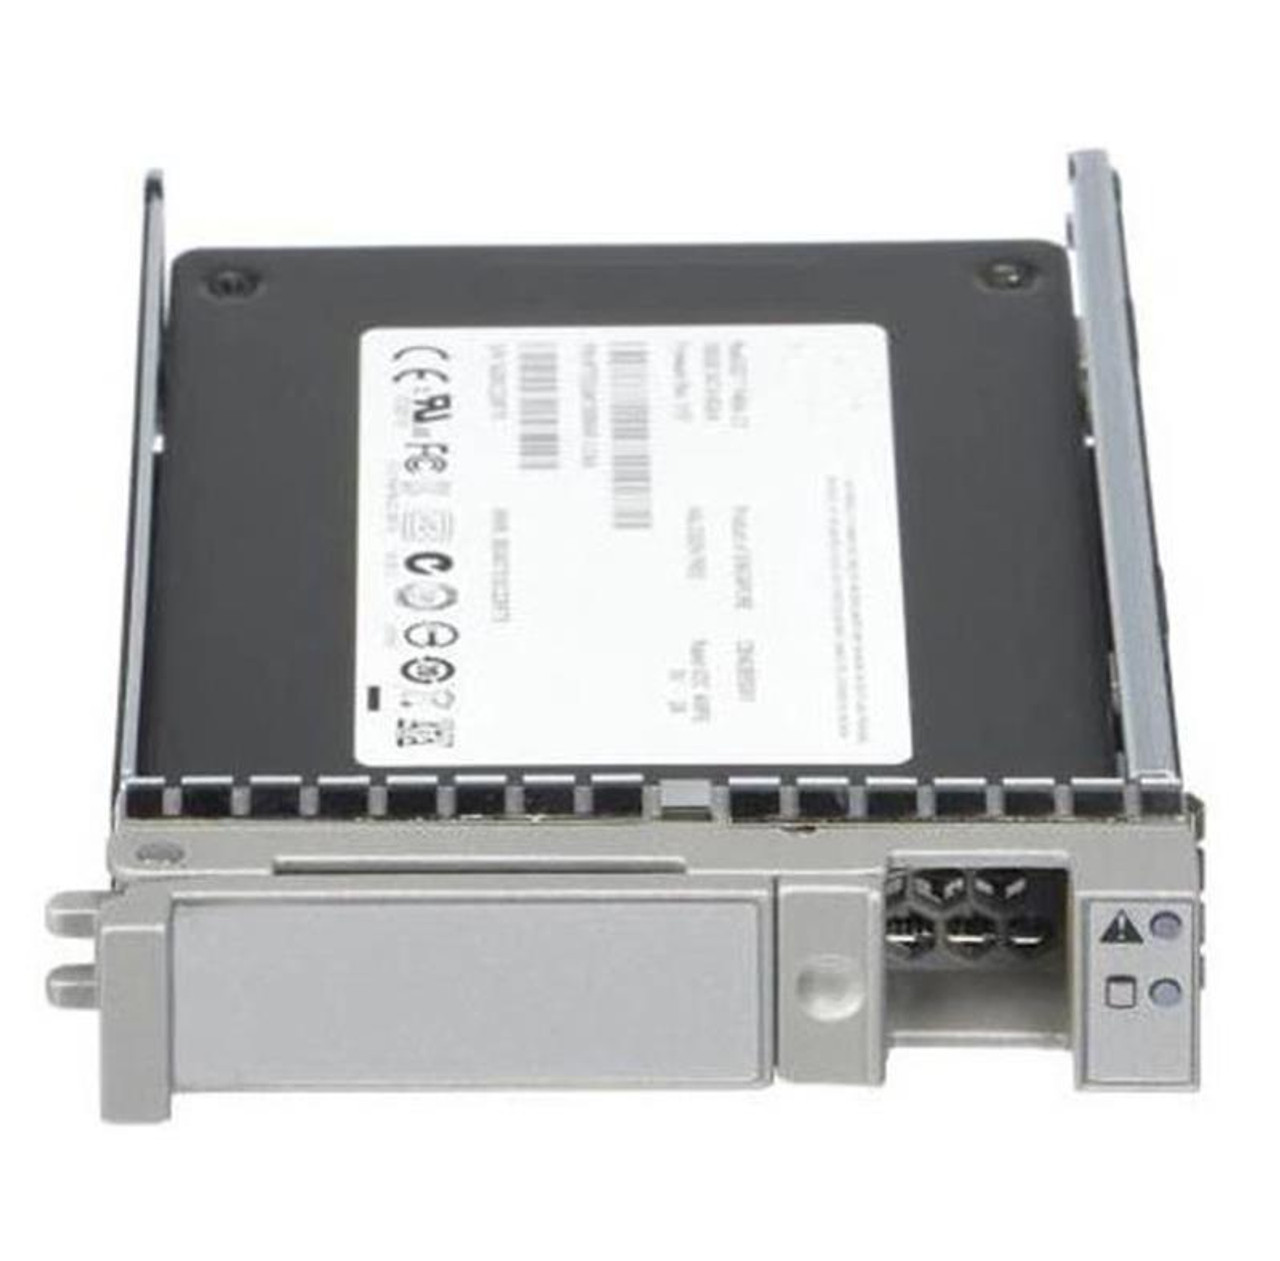 Cisco 800GB SAS 12Gbps Enterprise Performance (SED) 2.5-inch Internal Solid State Drive (SSD)